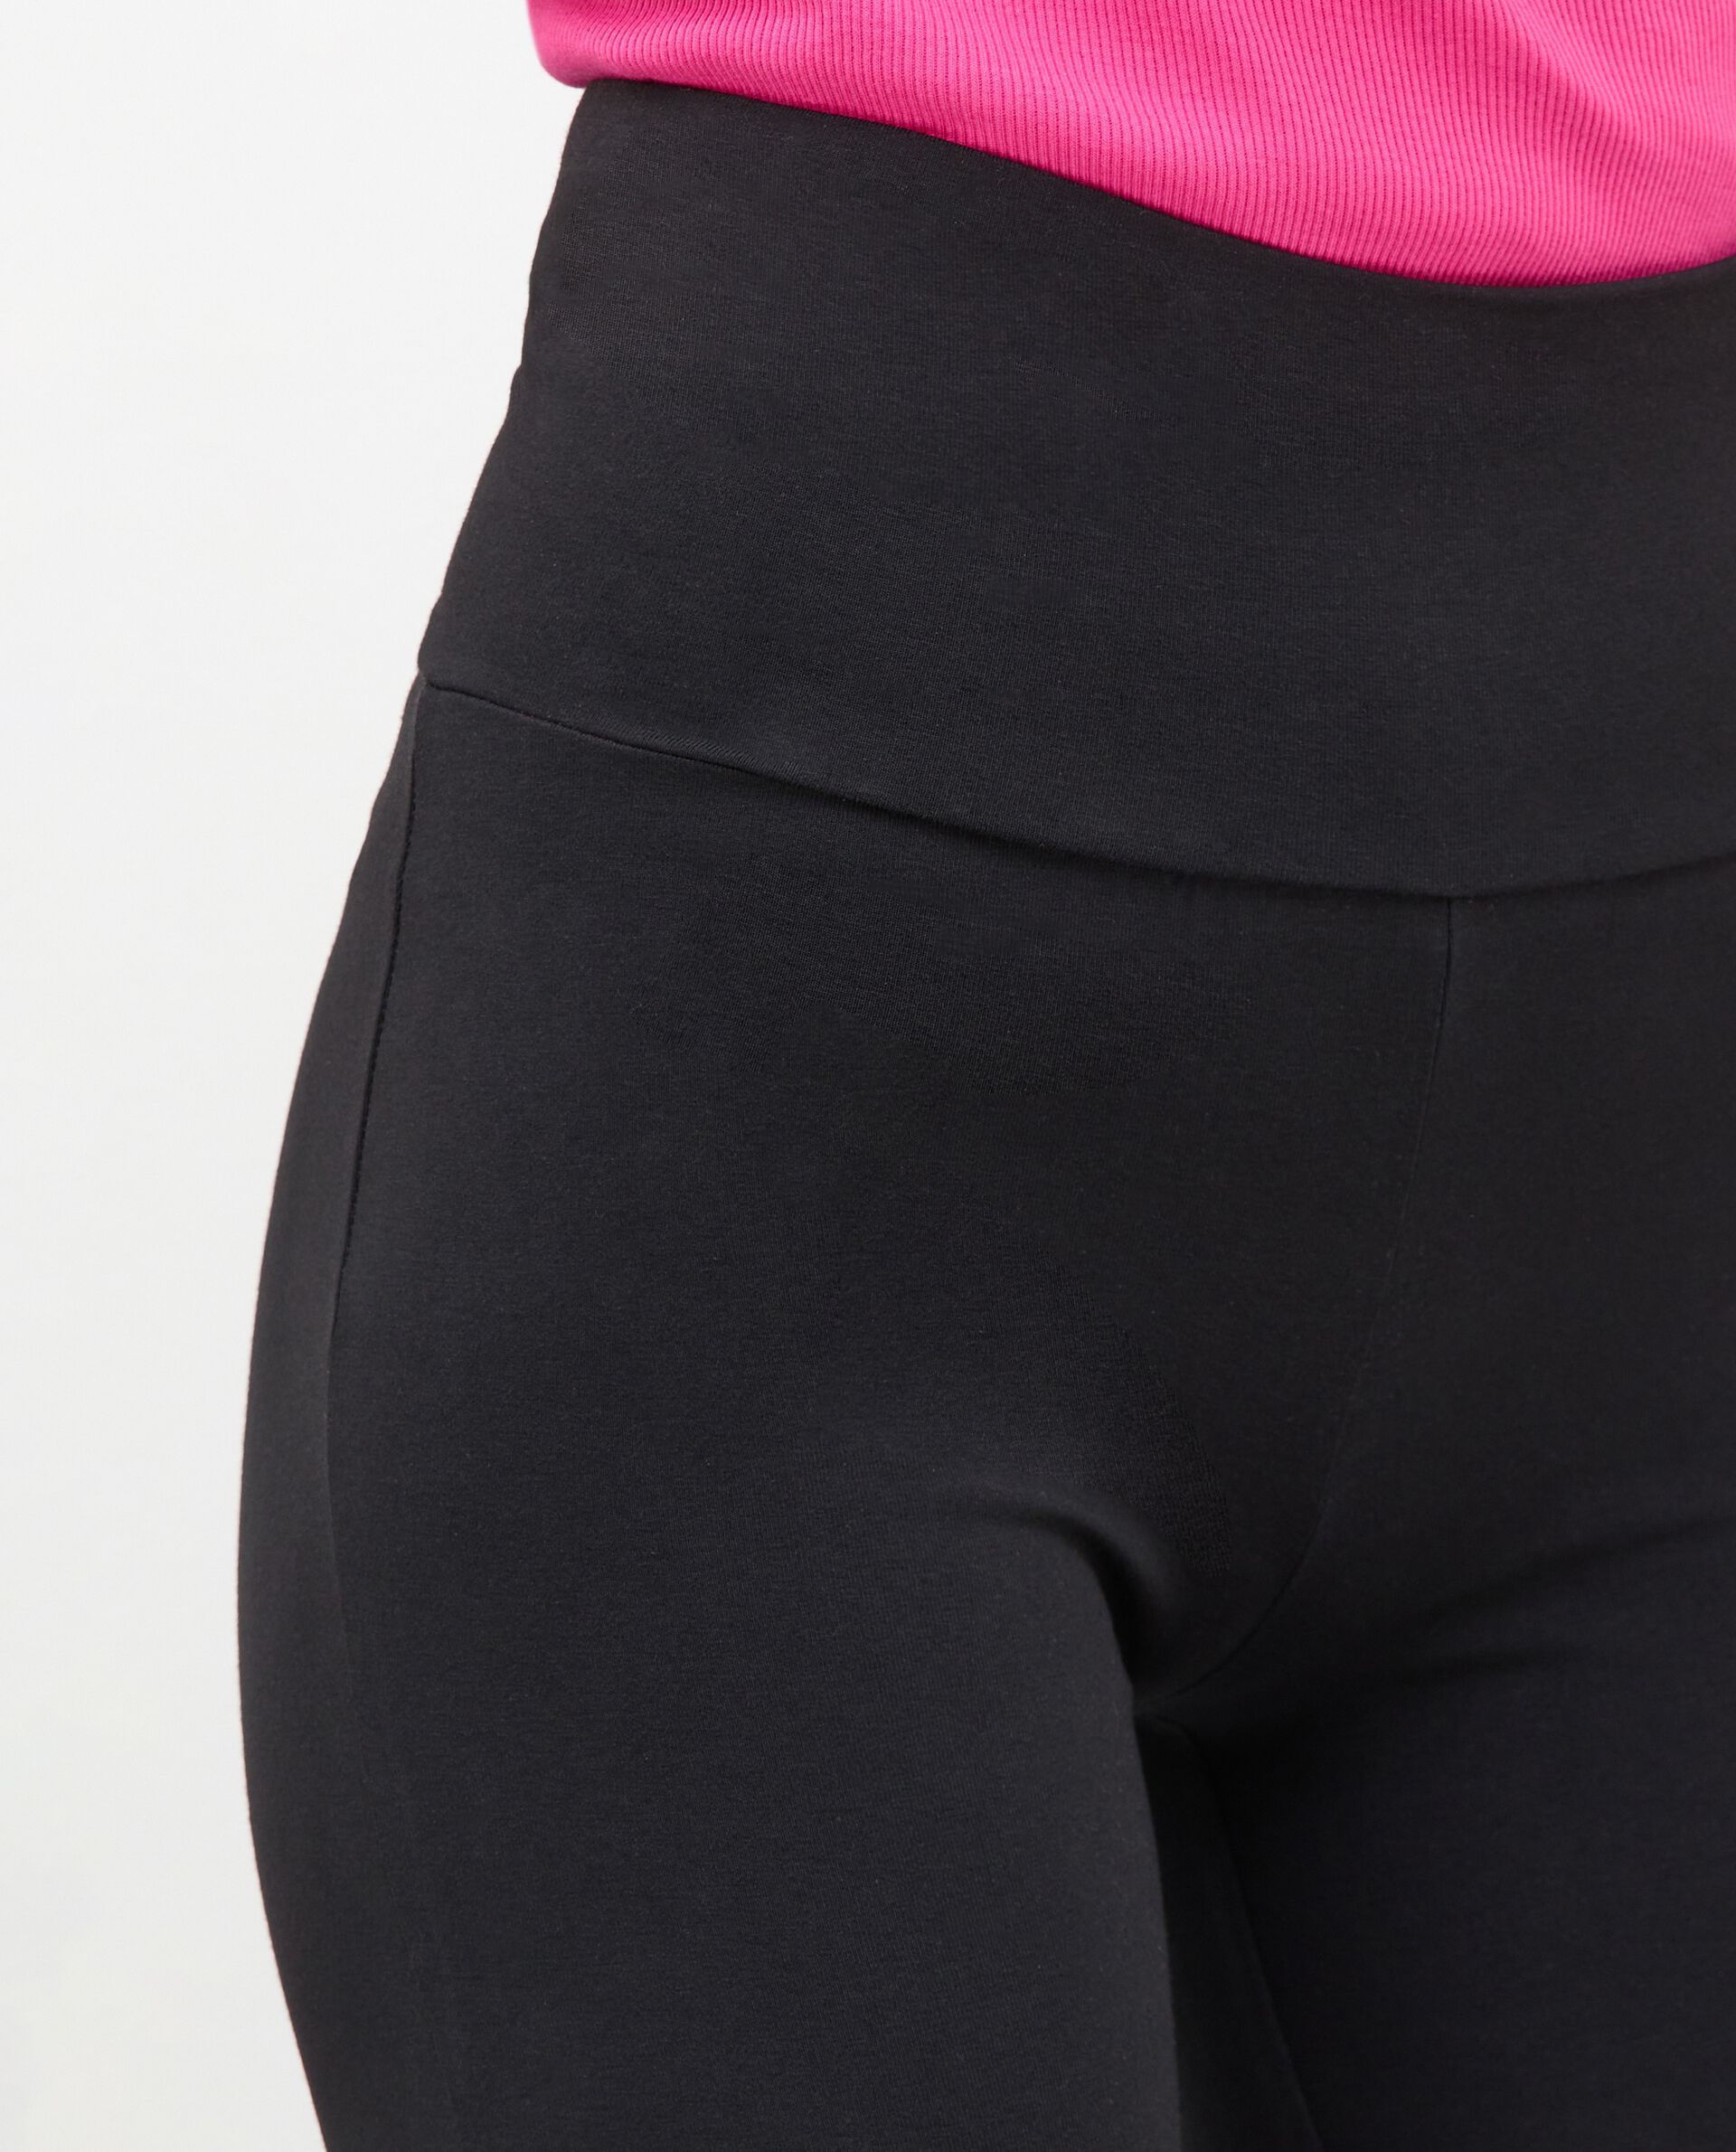 Shorts ciclista Holistic fitness in cotone stretch donna